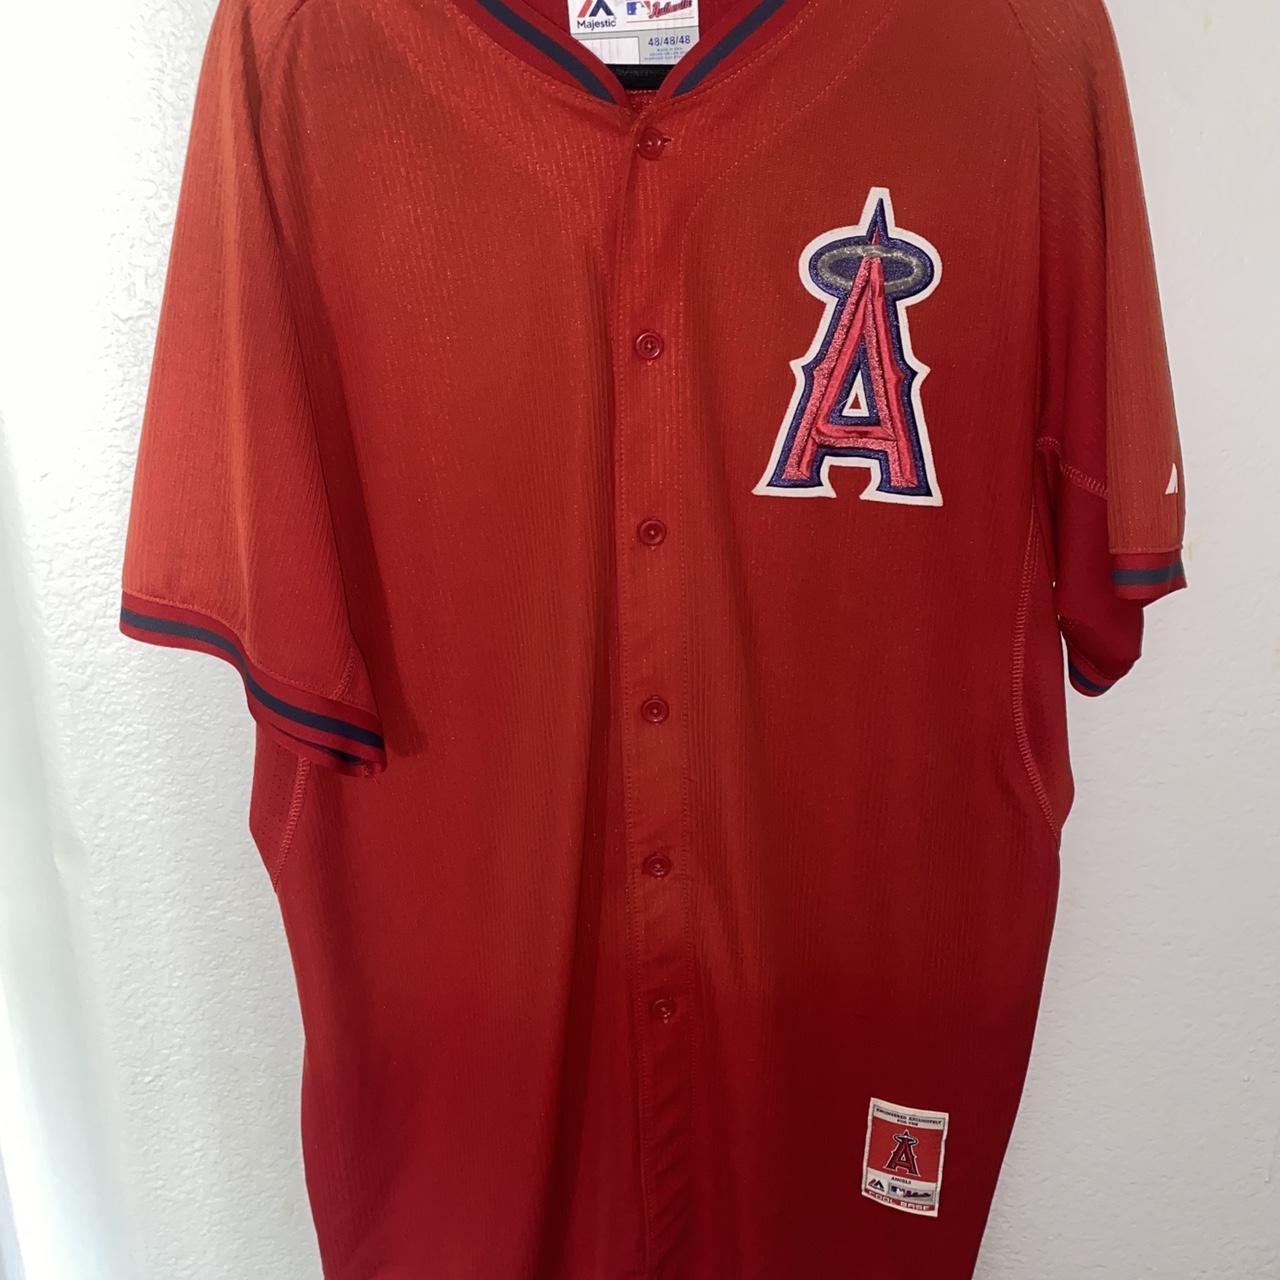 Los Angeles Angels Red Authentic Majestic Athletic Jersey